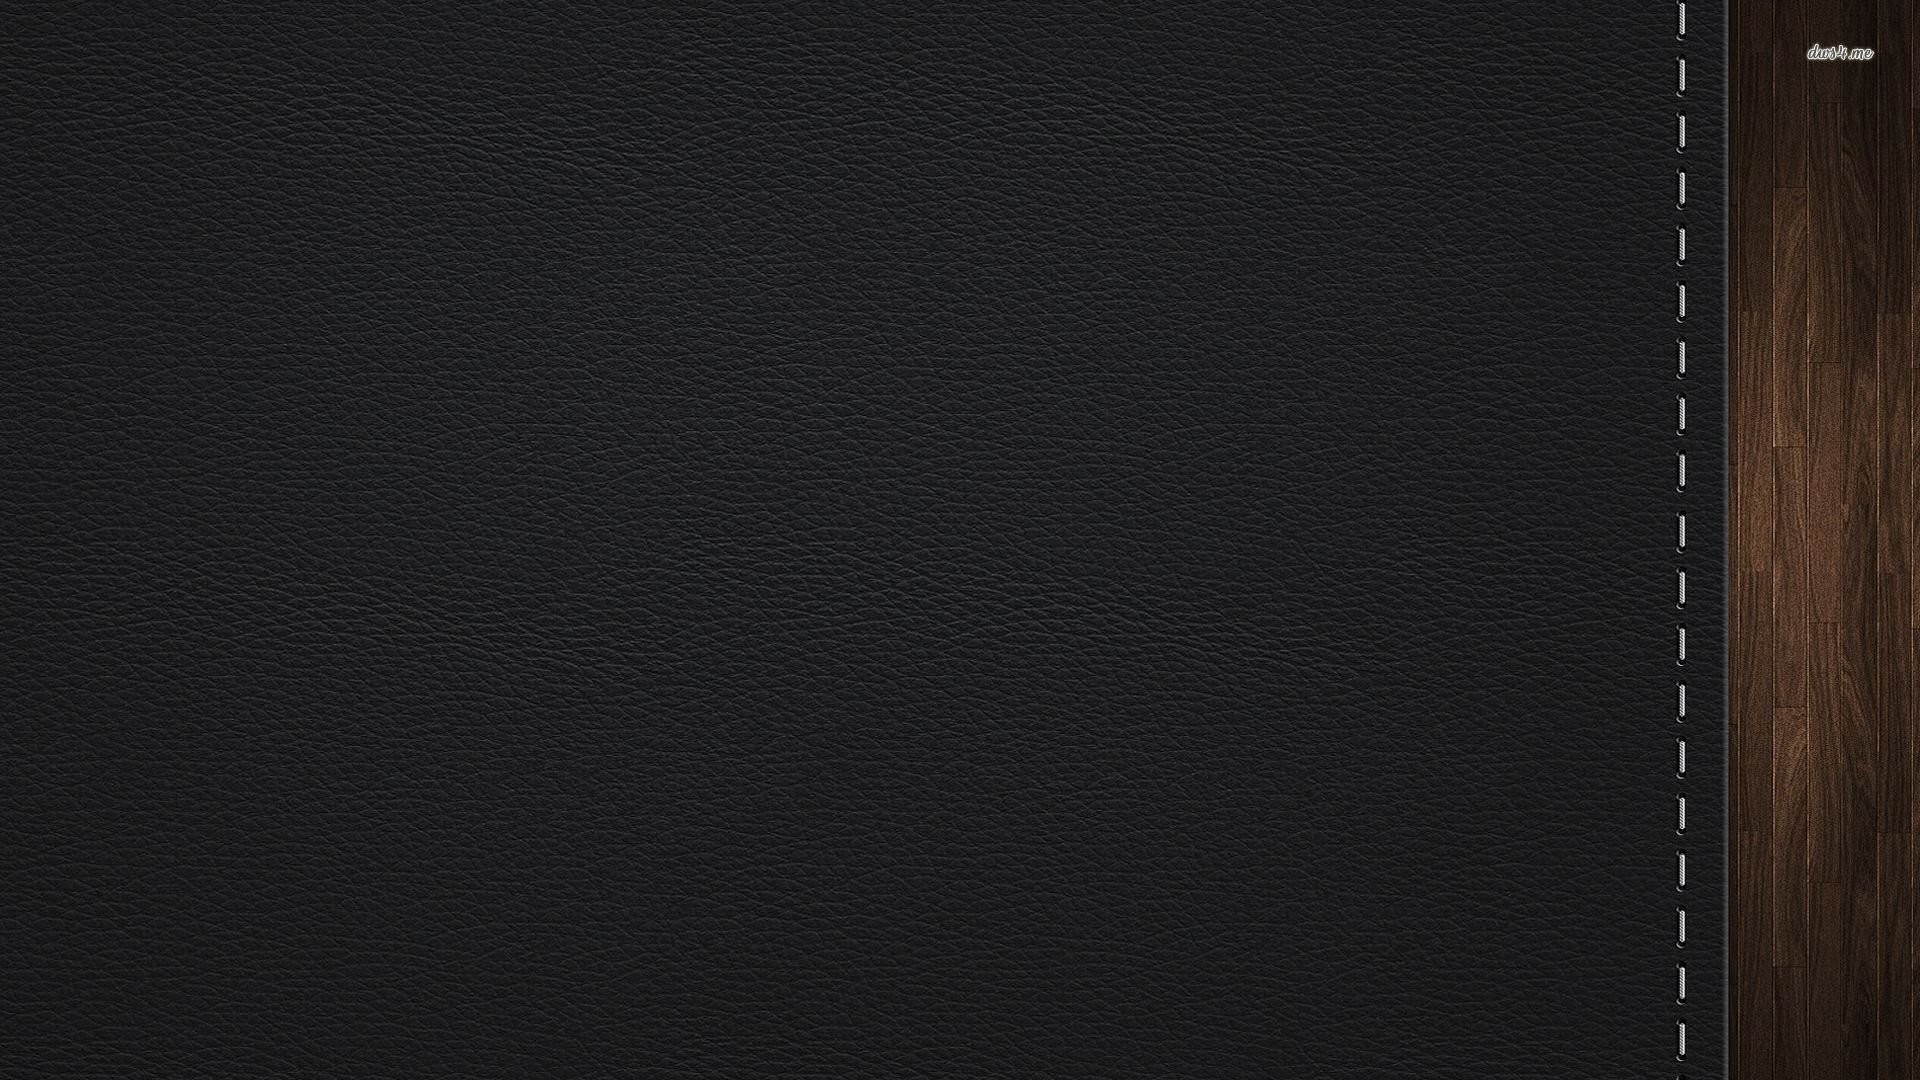 1920x1080 Texture Leather Black Cover Abstract Wood Textureds